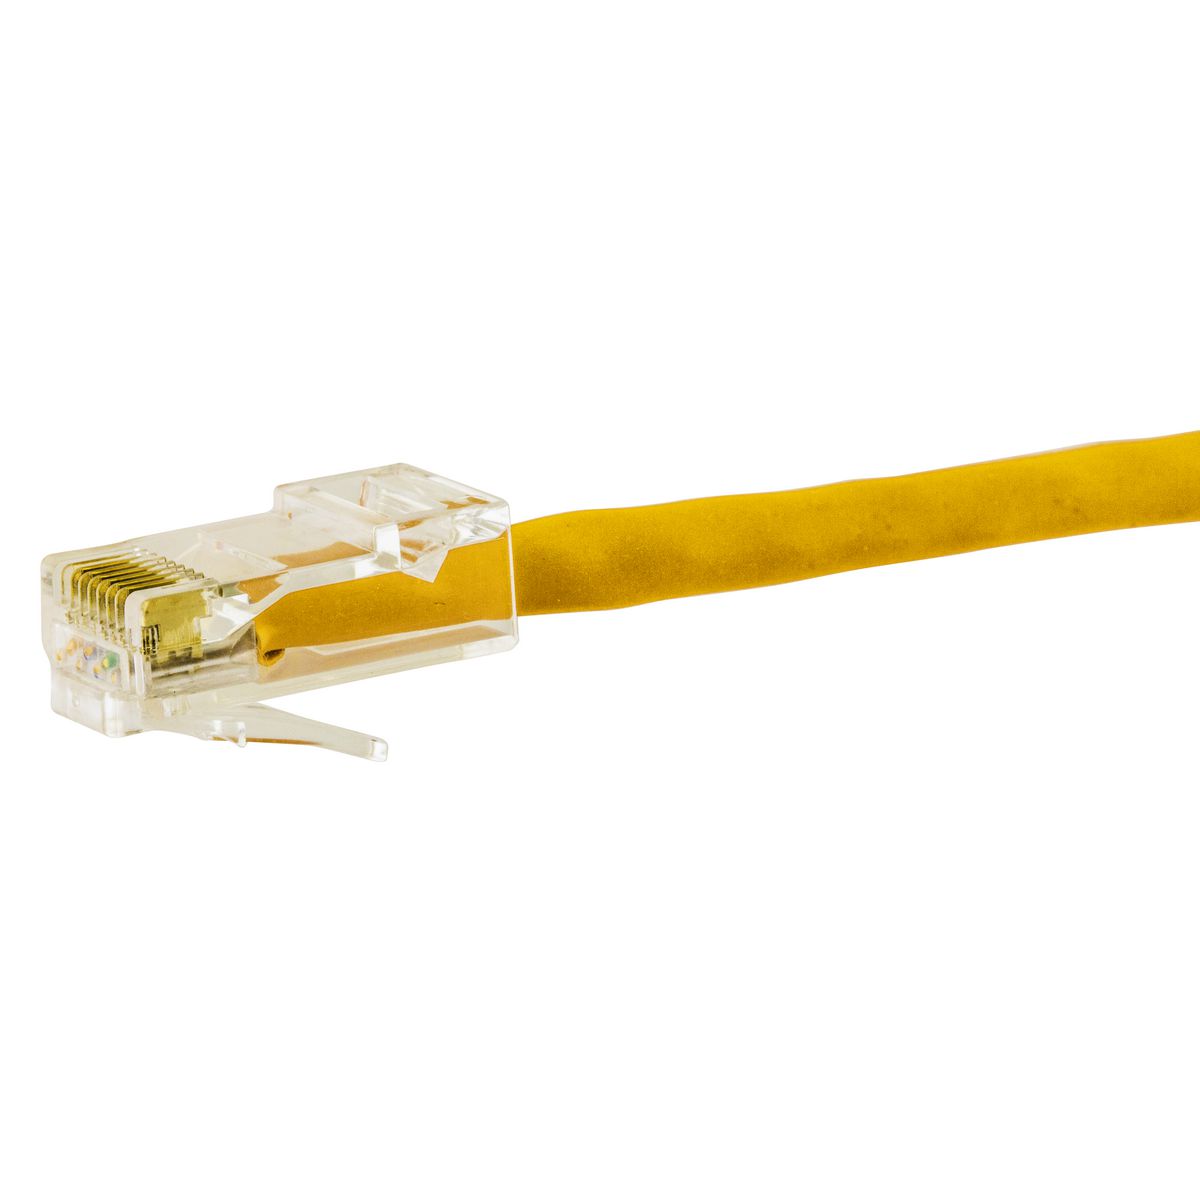 Hubbell Premise Wiring, Patch Cord, NETSELECT, Category 5E, Plenum,Yellow, No Boot, 10 Foot